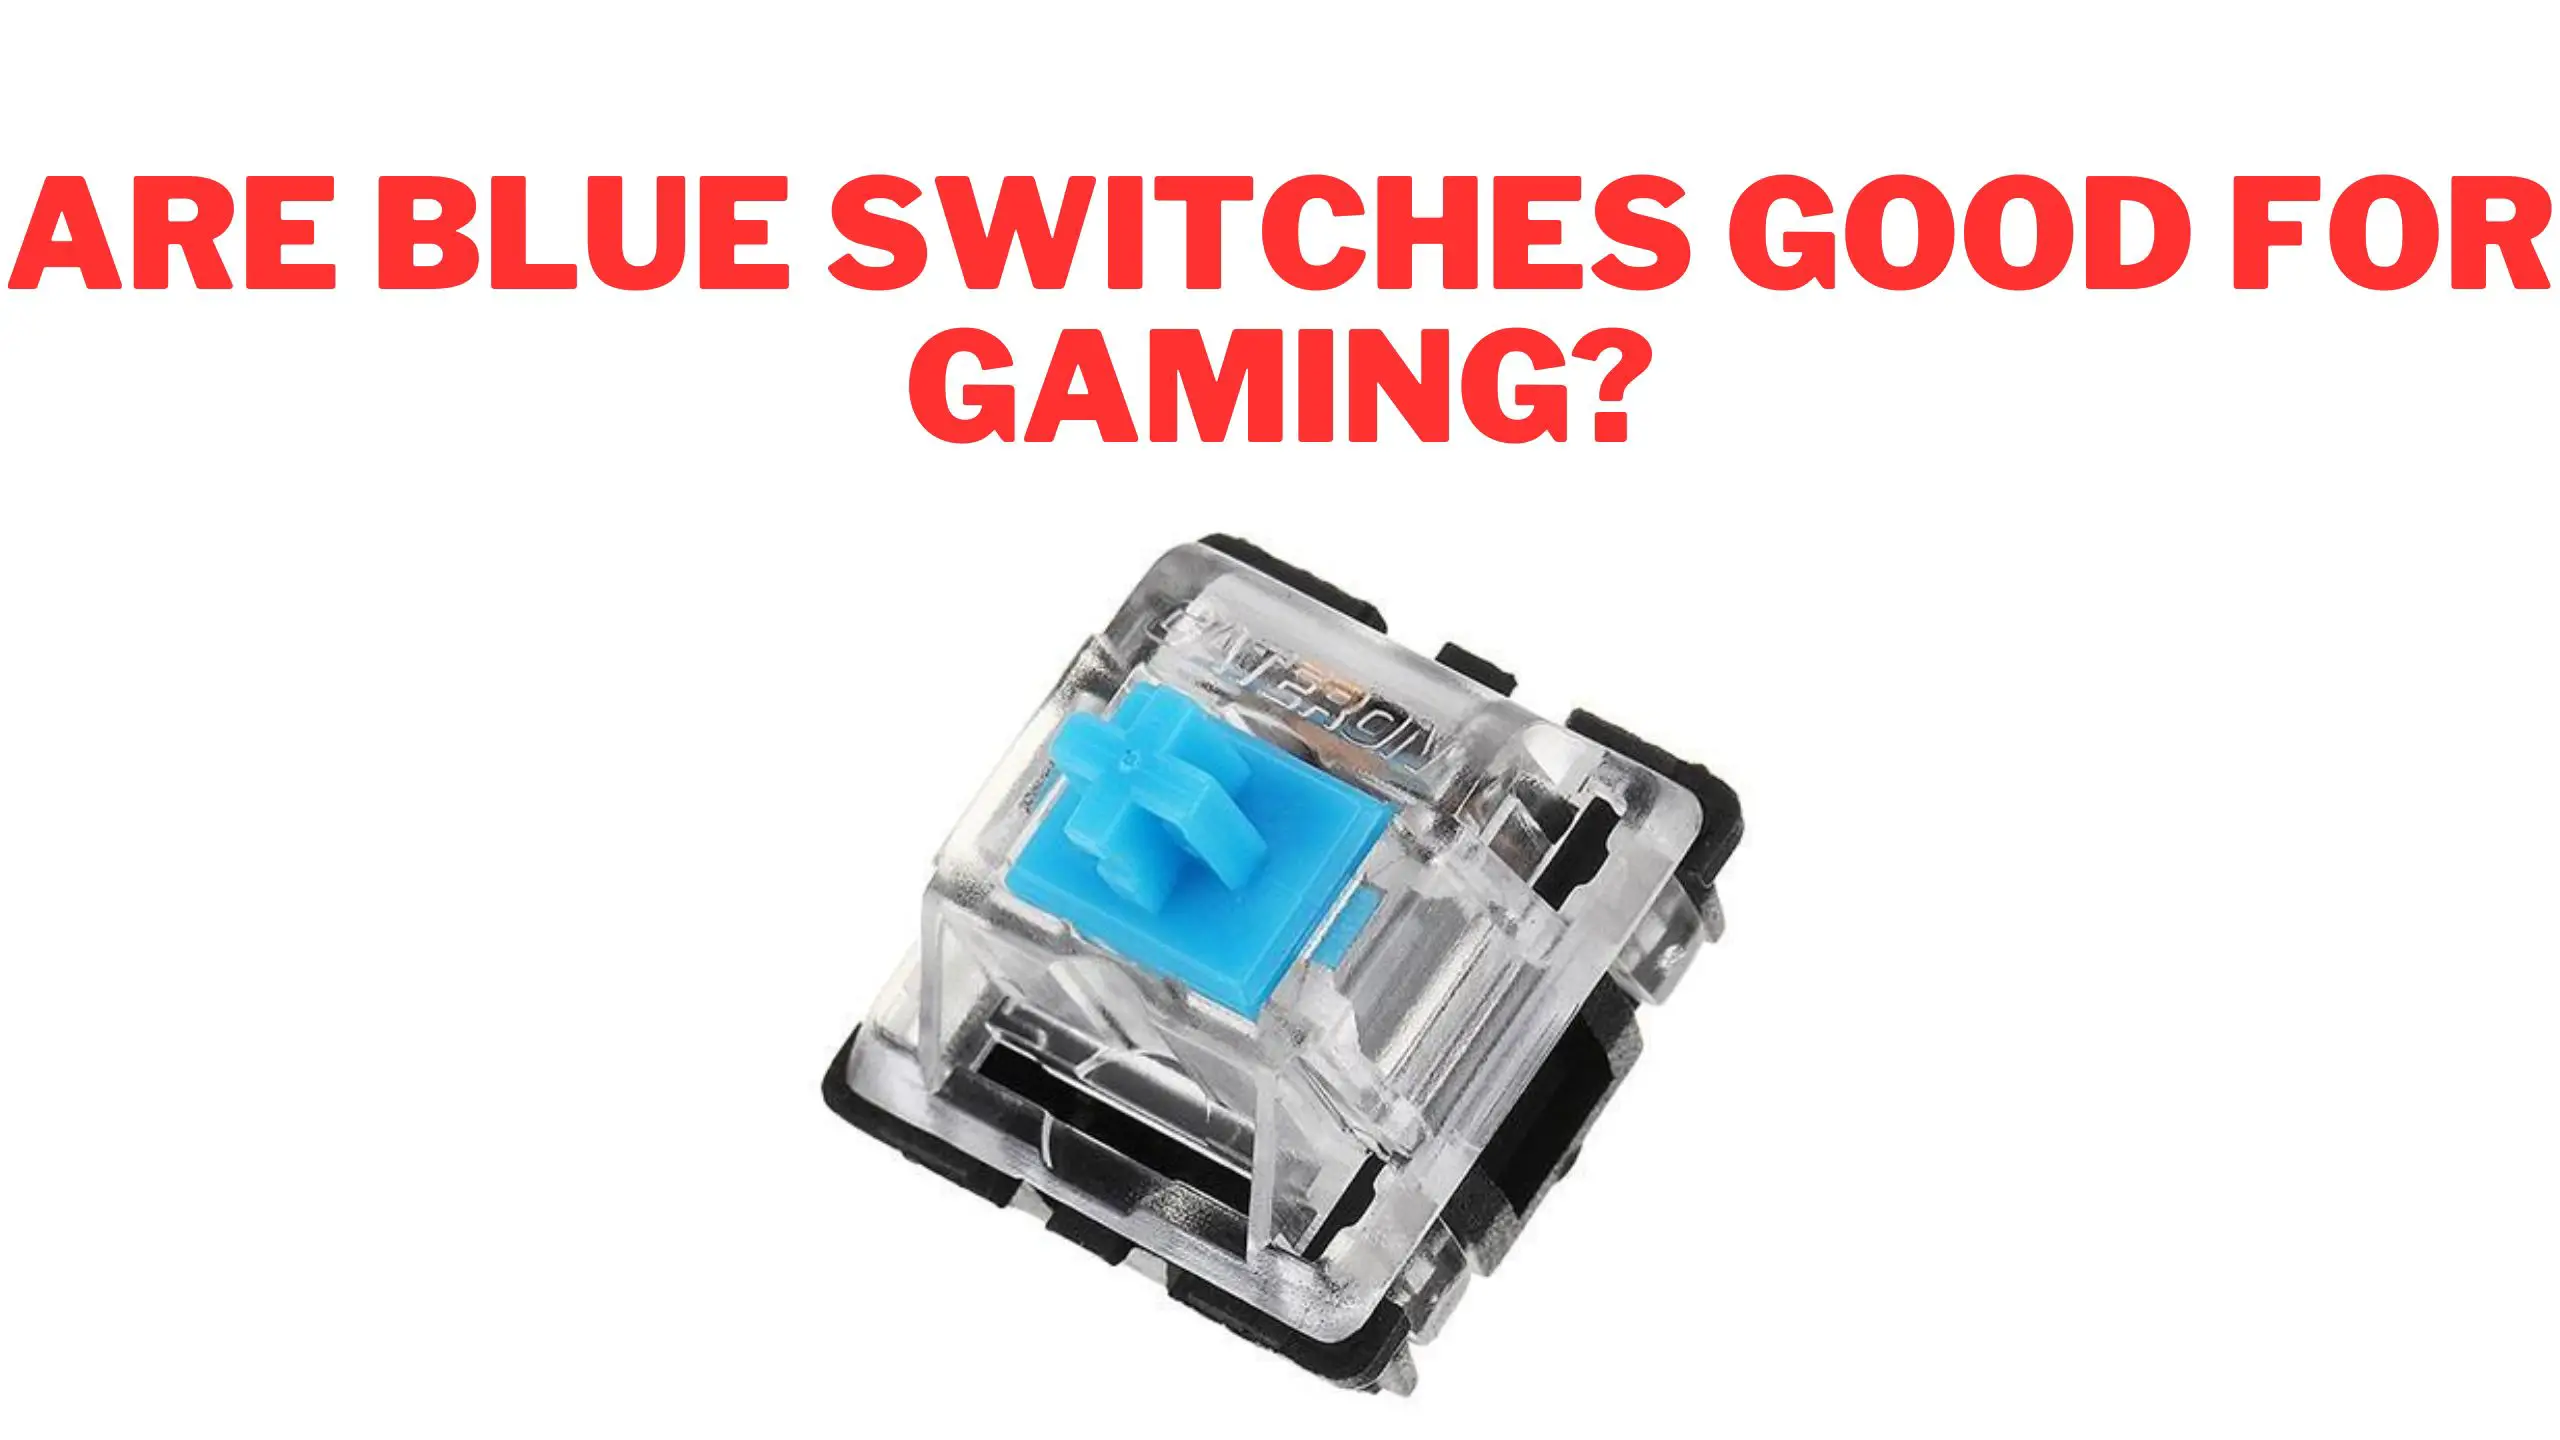 Are Blue Switches Good for Gaming